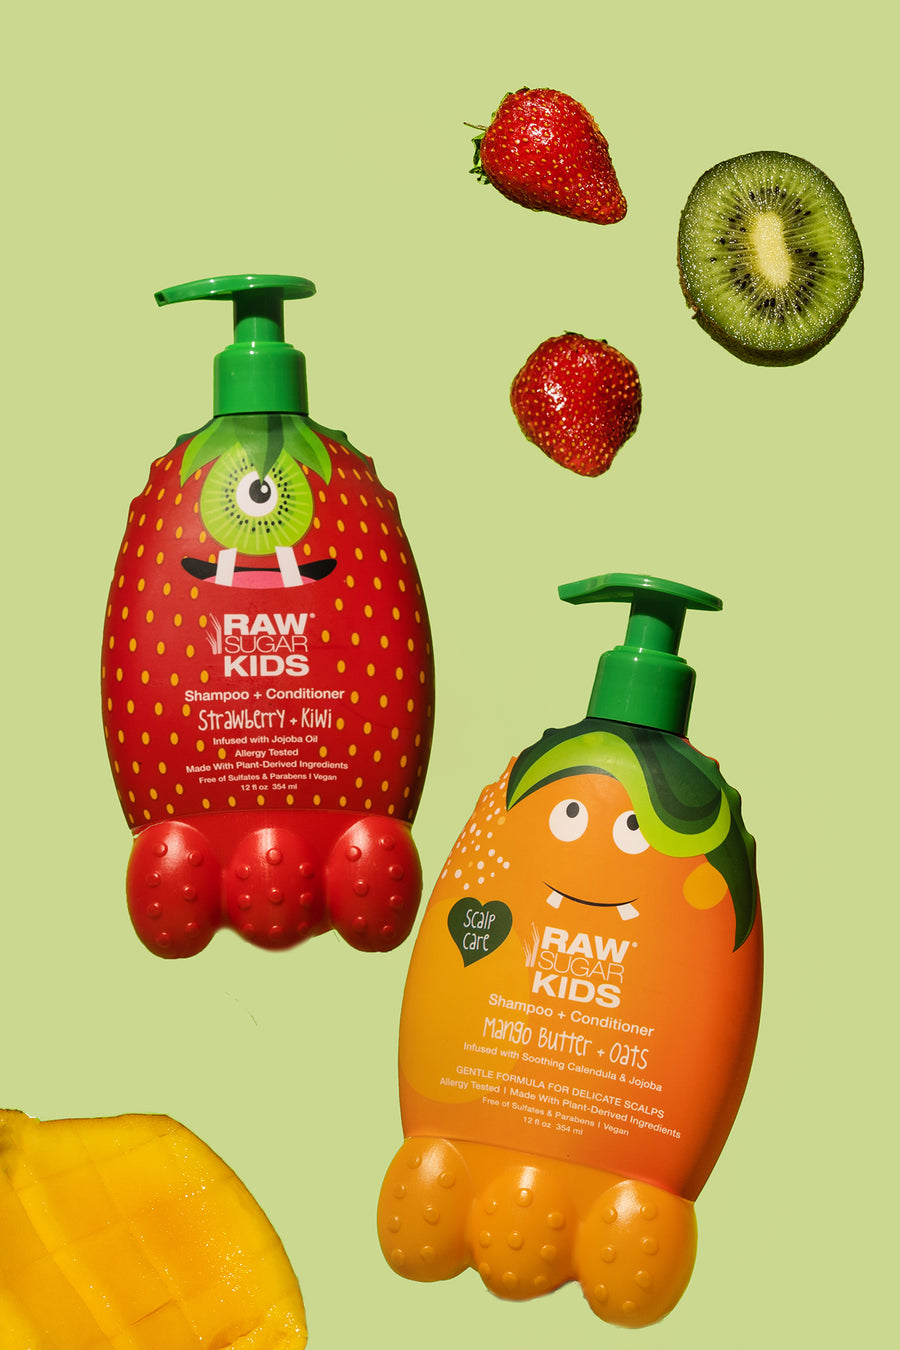 Raw Sugar Kids Strawberry + Kiwi and Mango Butter + Oats Shampoo + Conditioner floating in the air with a fresh kiwi slice, 2 strawberries and a slice of mango